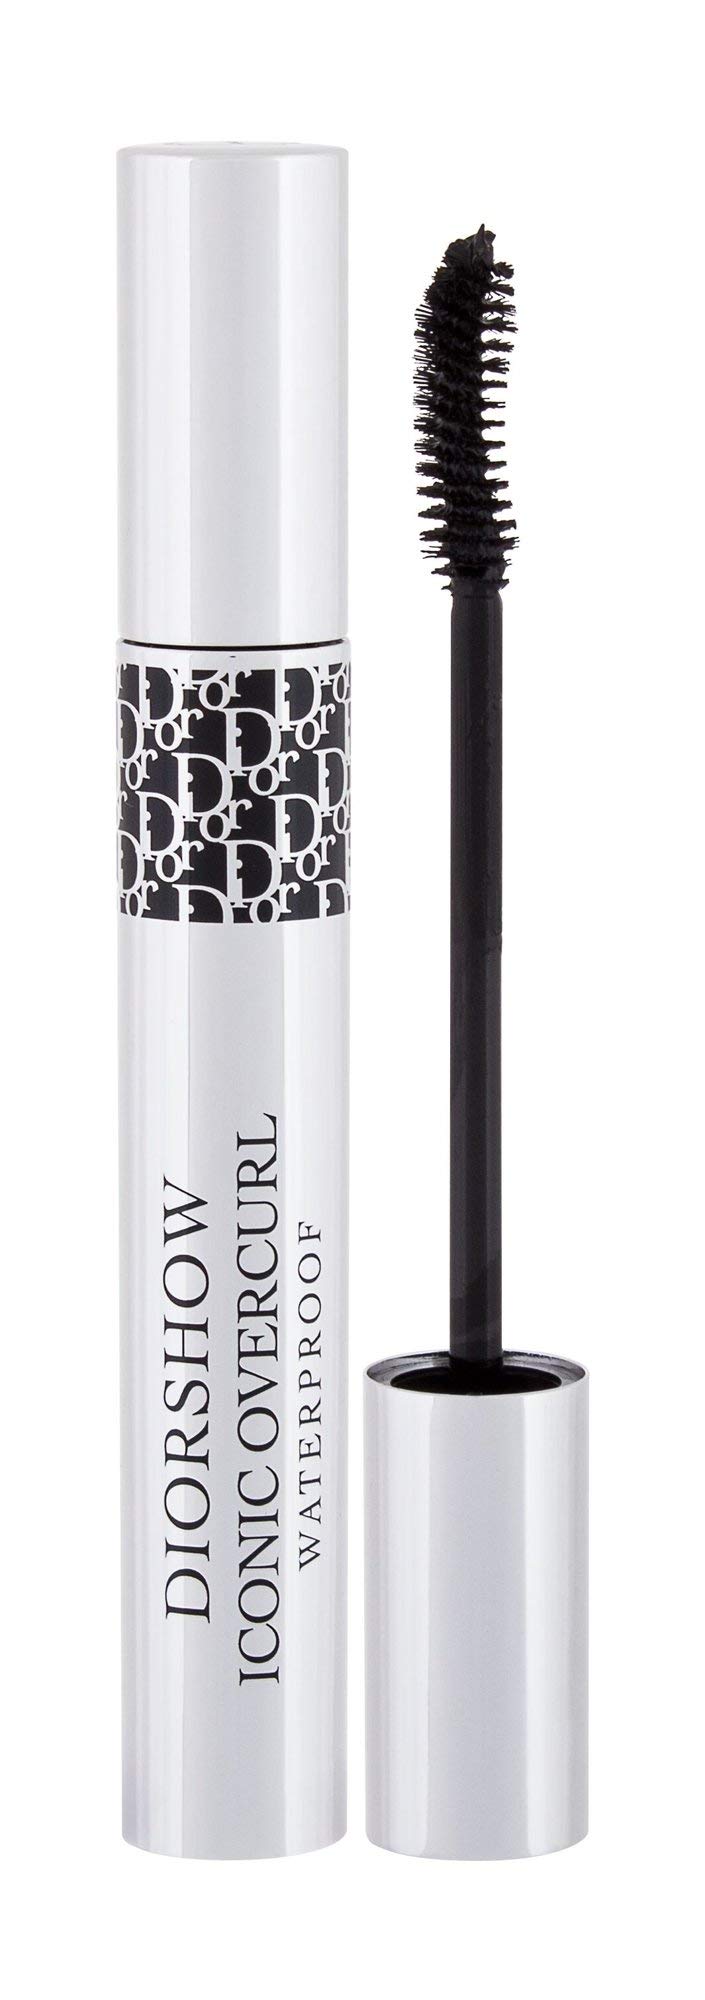 Dior Diorshow (091) Overcurl Waterproof Mascara Iconic Spectacular Black 24H 0.21 Ounce